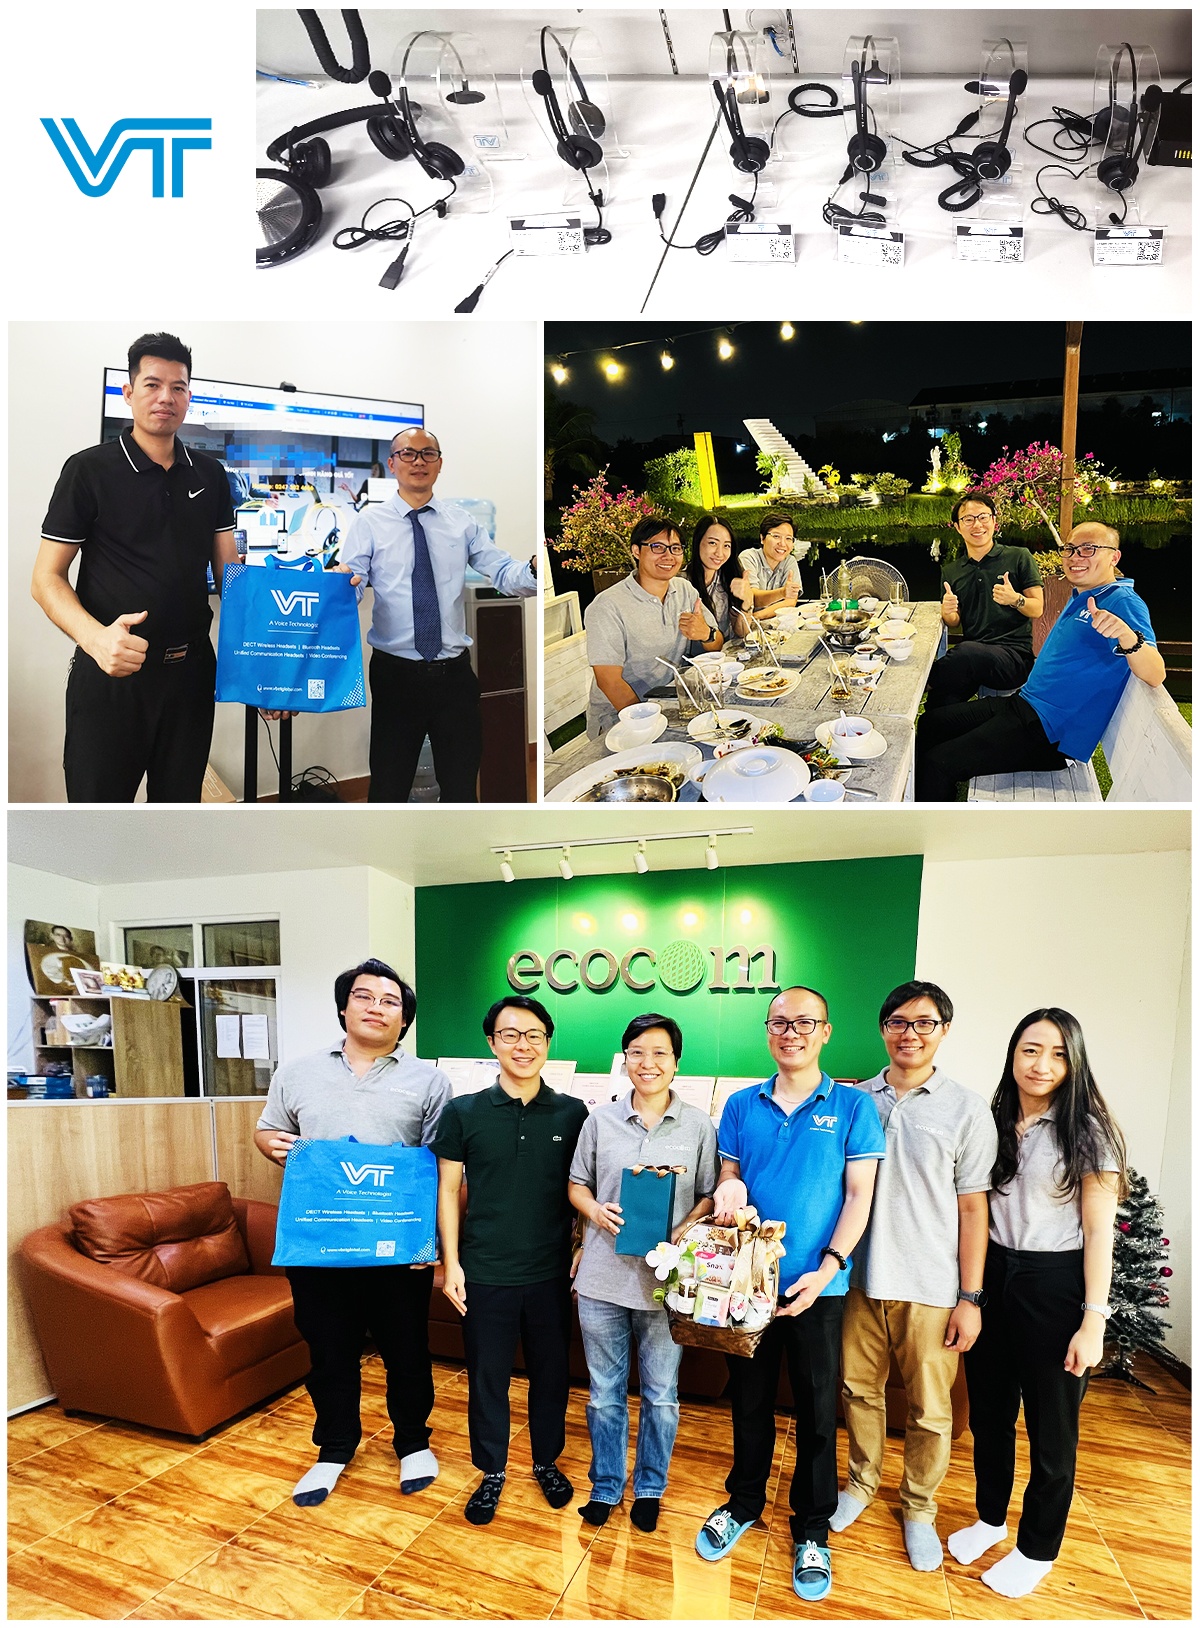 VT came to Asia countries and visited our partners during the Labor Day holiday